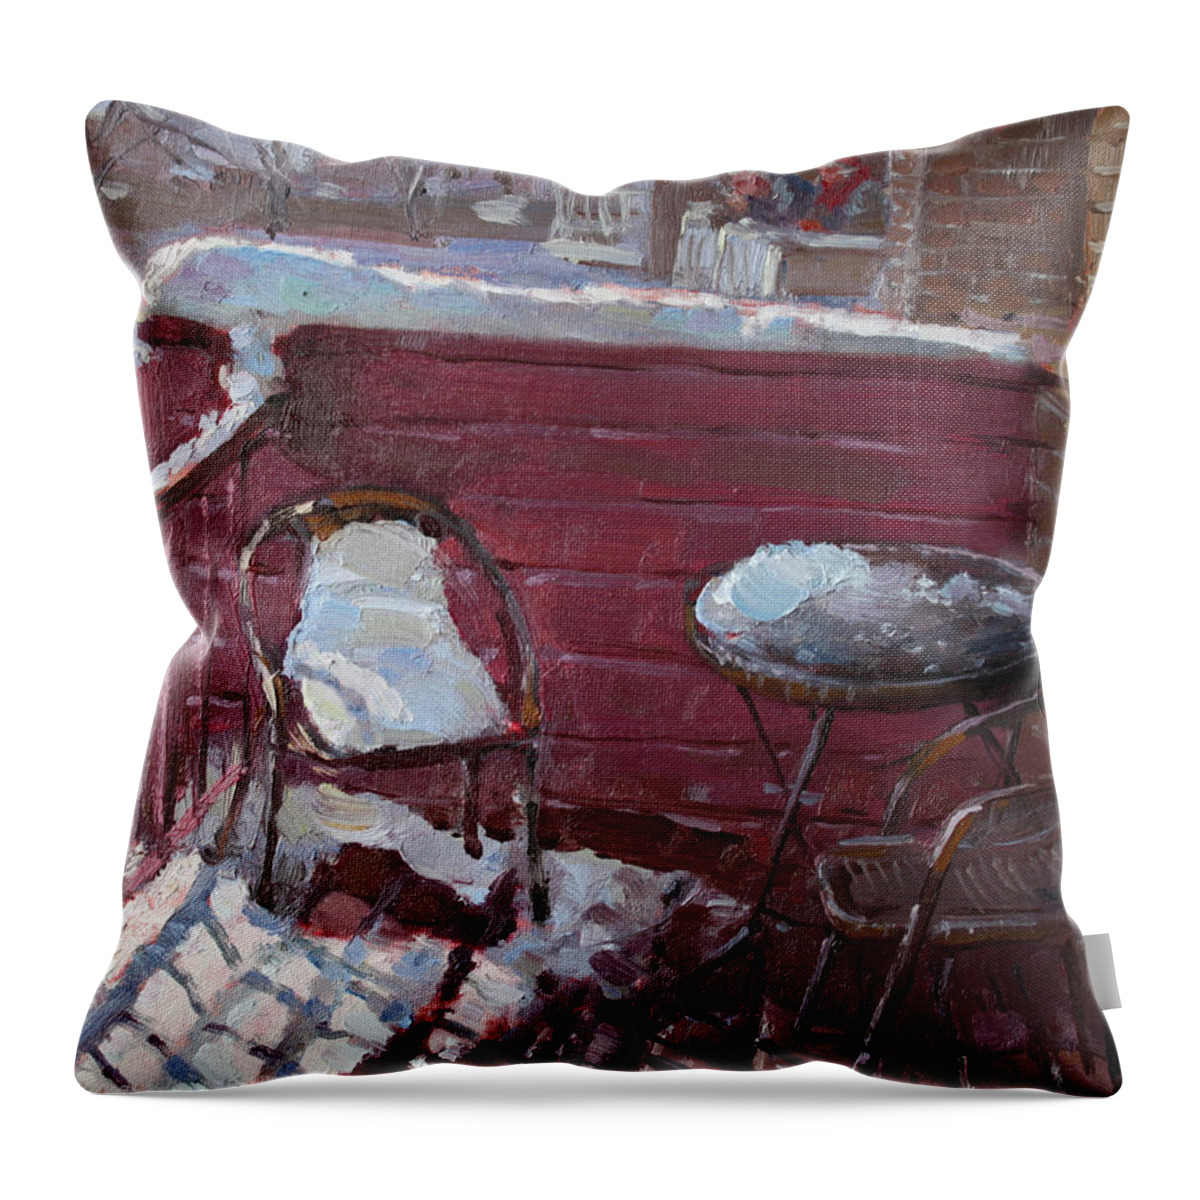 My Neighbors Throw Pillow featuring the painting The Neighbors by Ylli Haruni